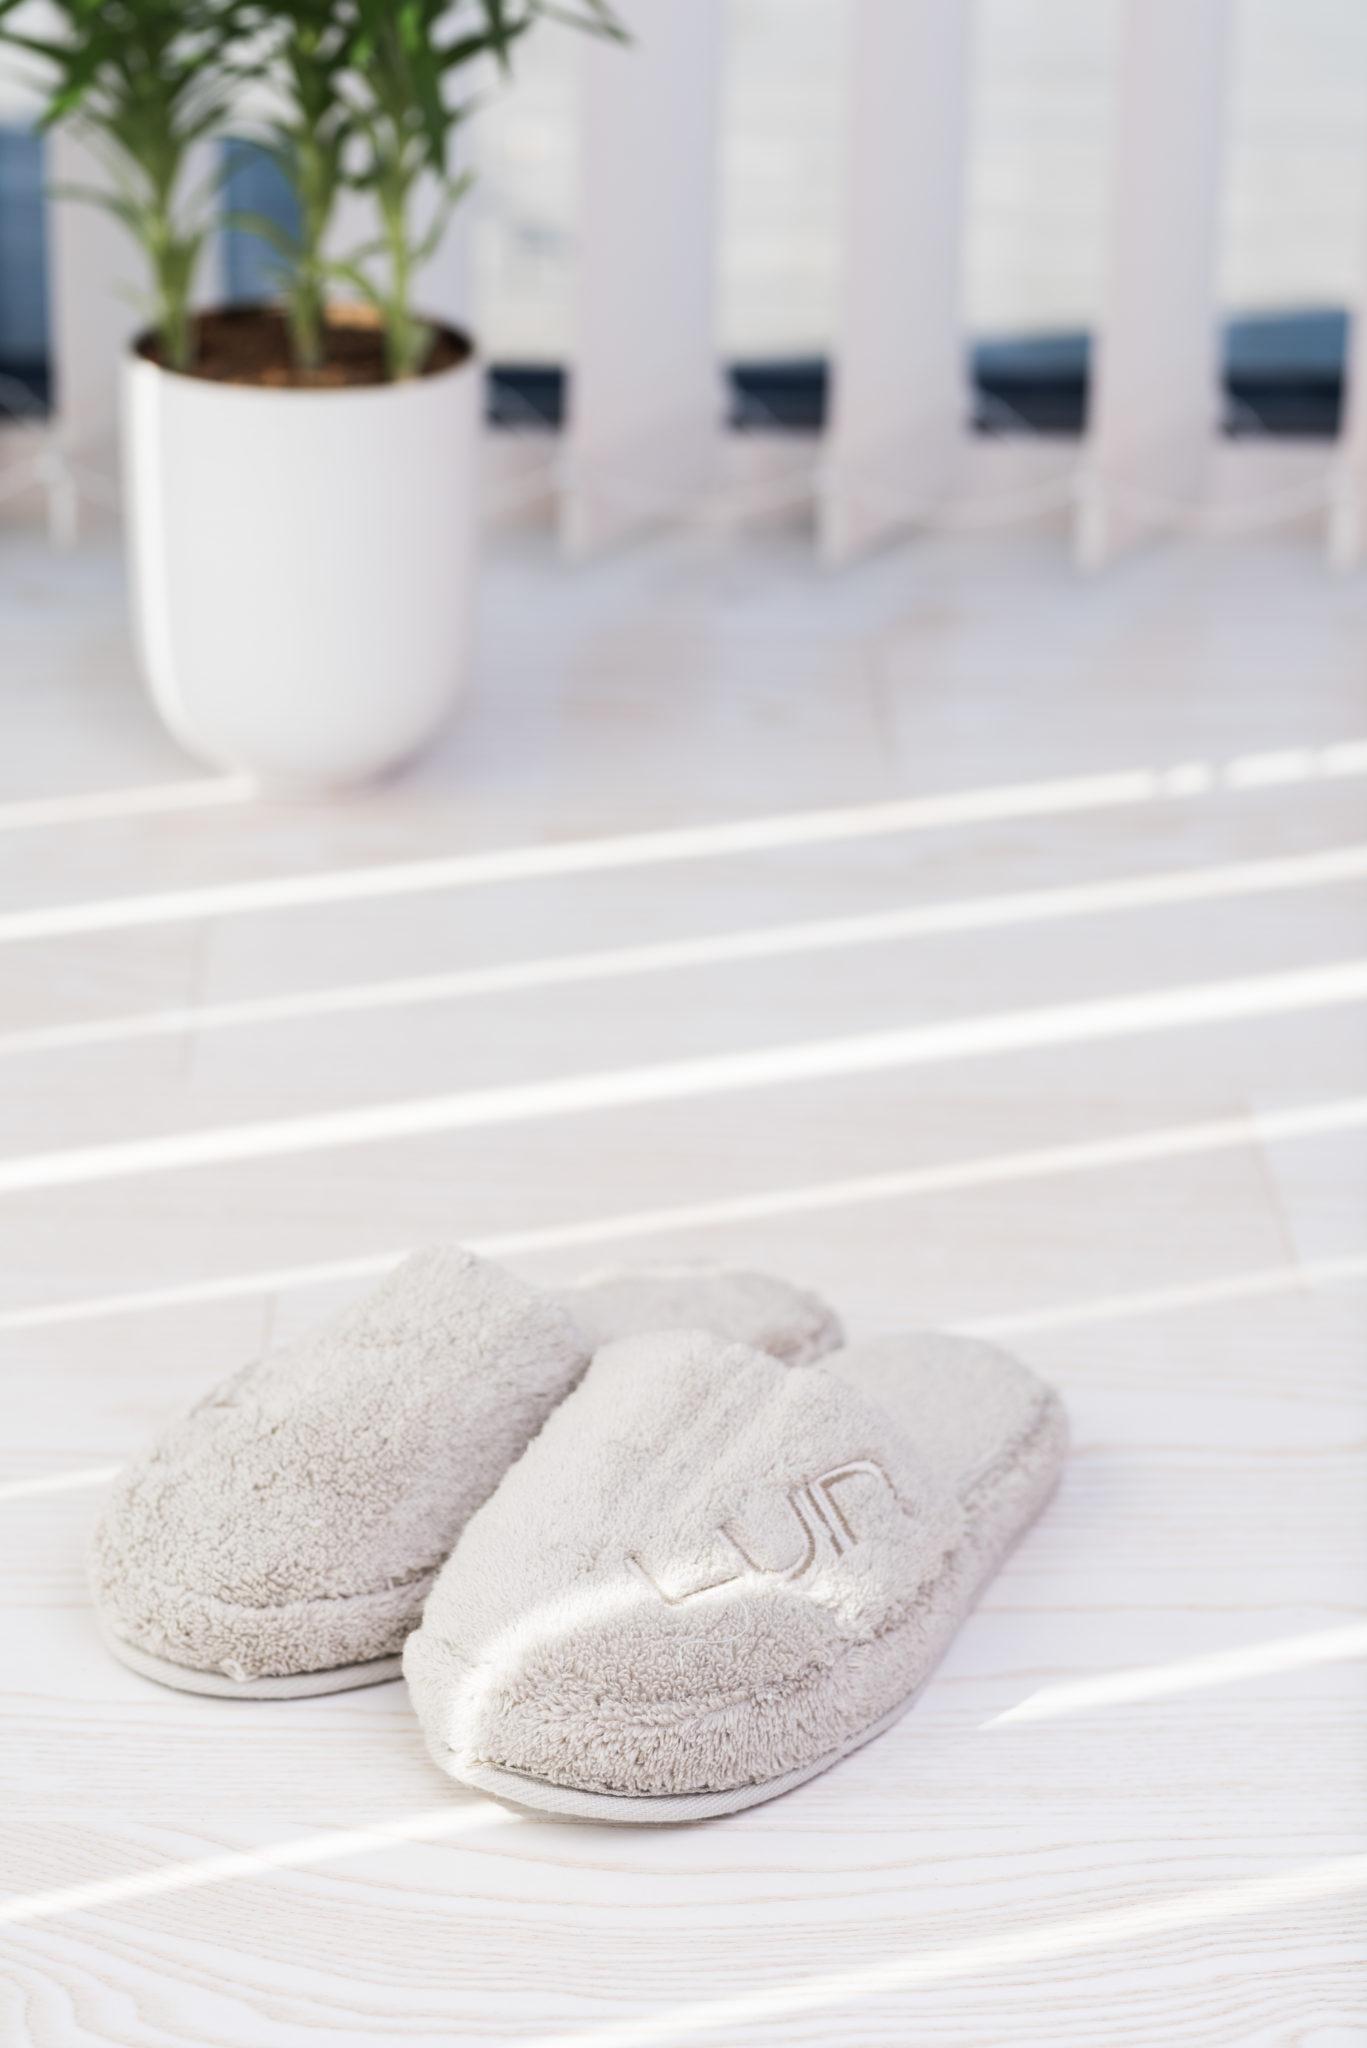 Cosy Bath Slippers | Luin Living